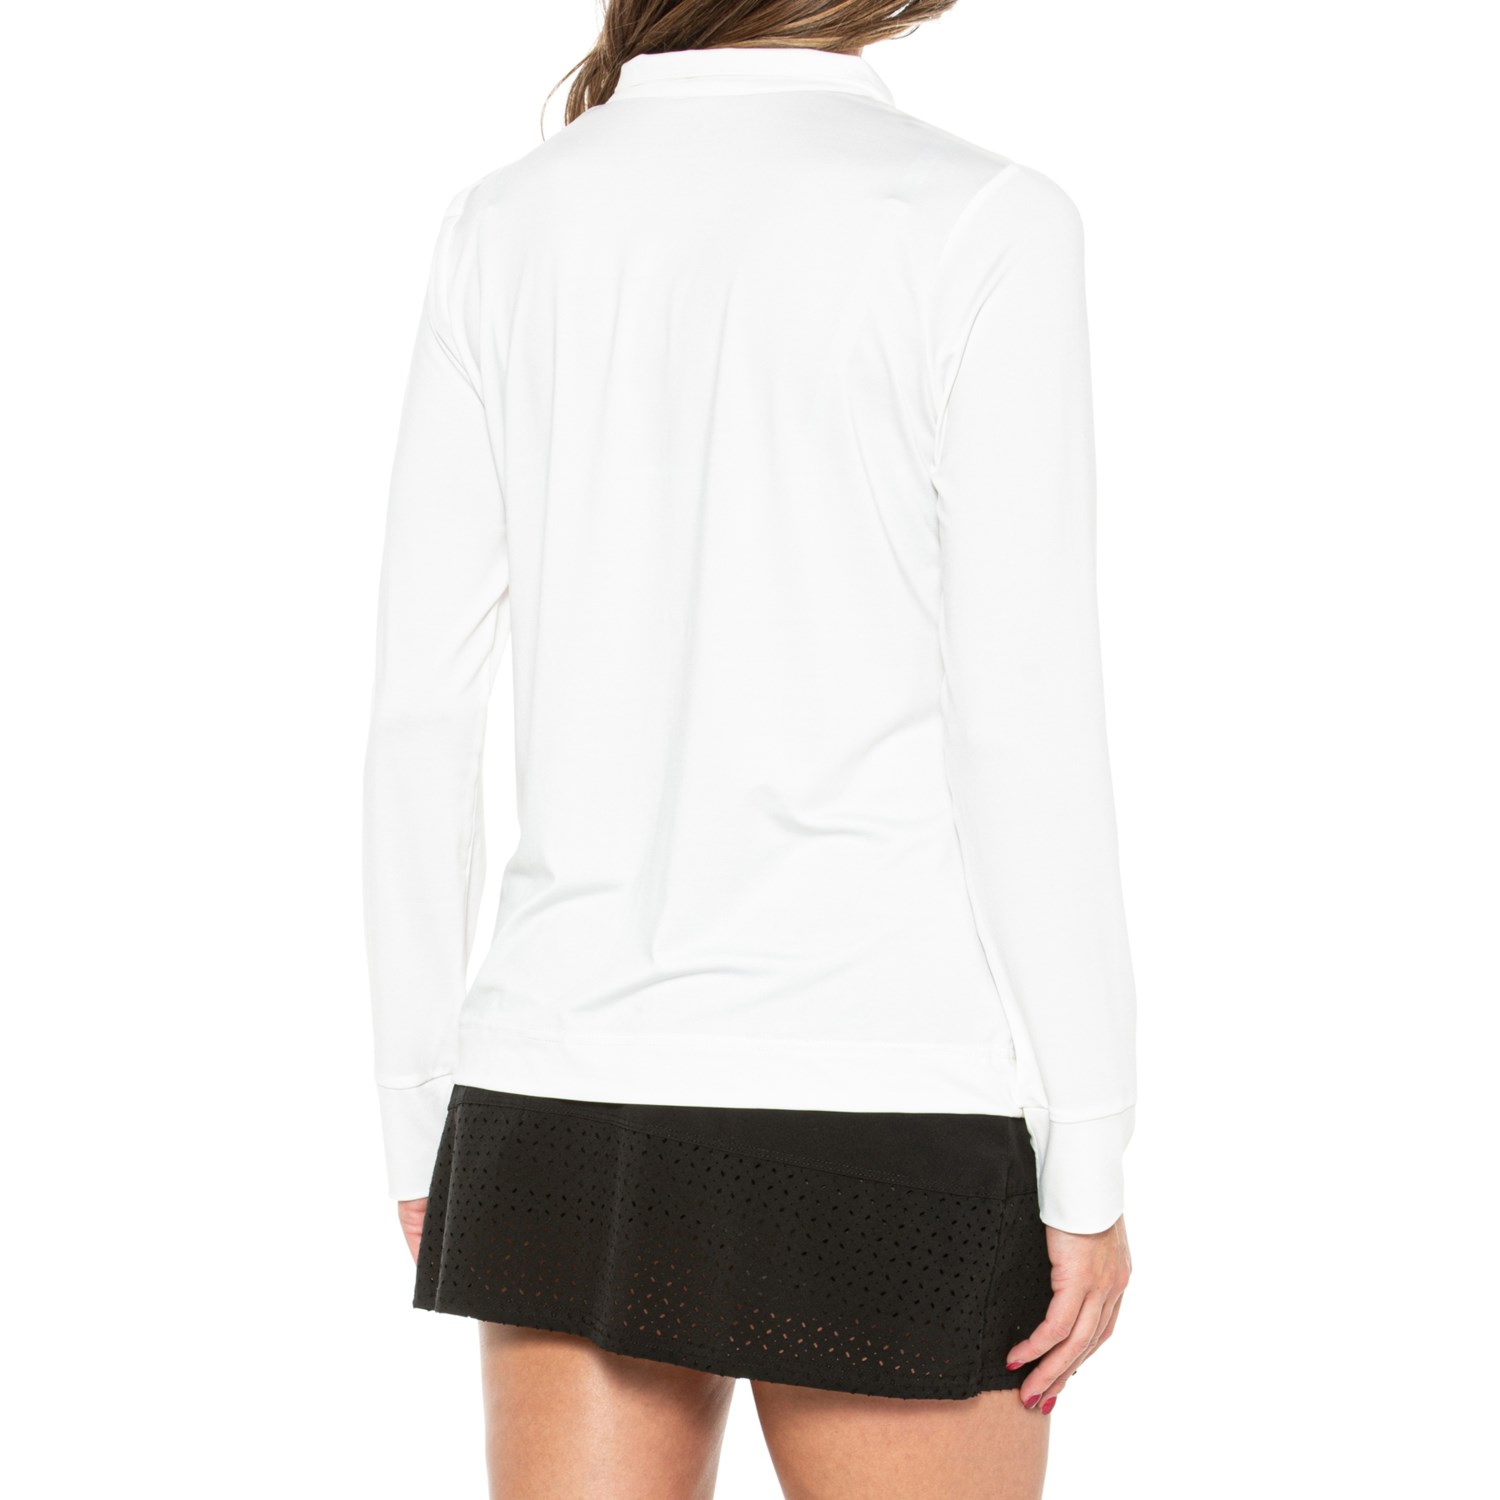 Stella Parker Ruched Front Shirt - UPF 50, Zip Neck, Long Sleeve - Save 33%